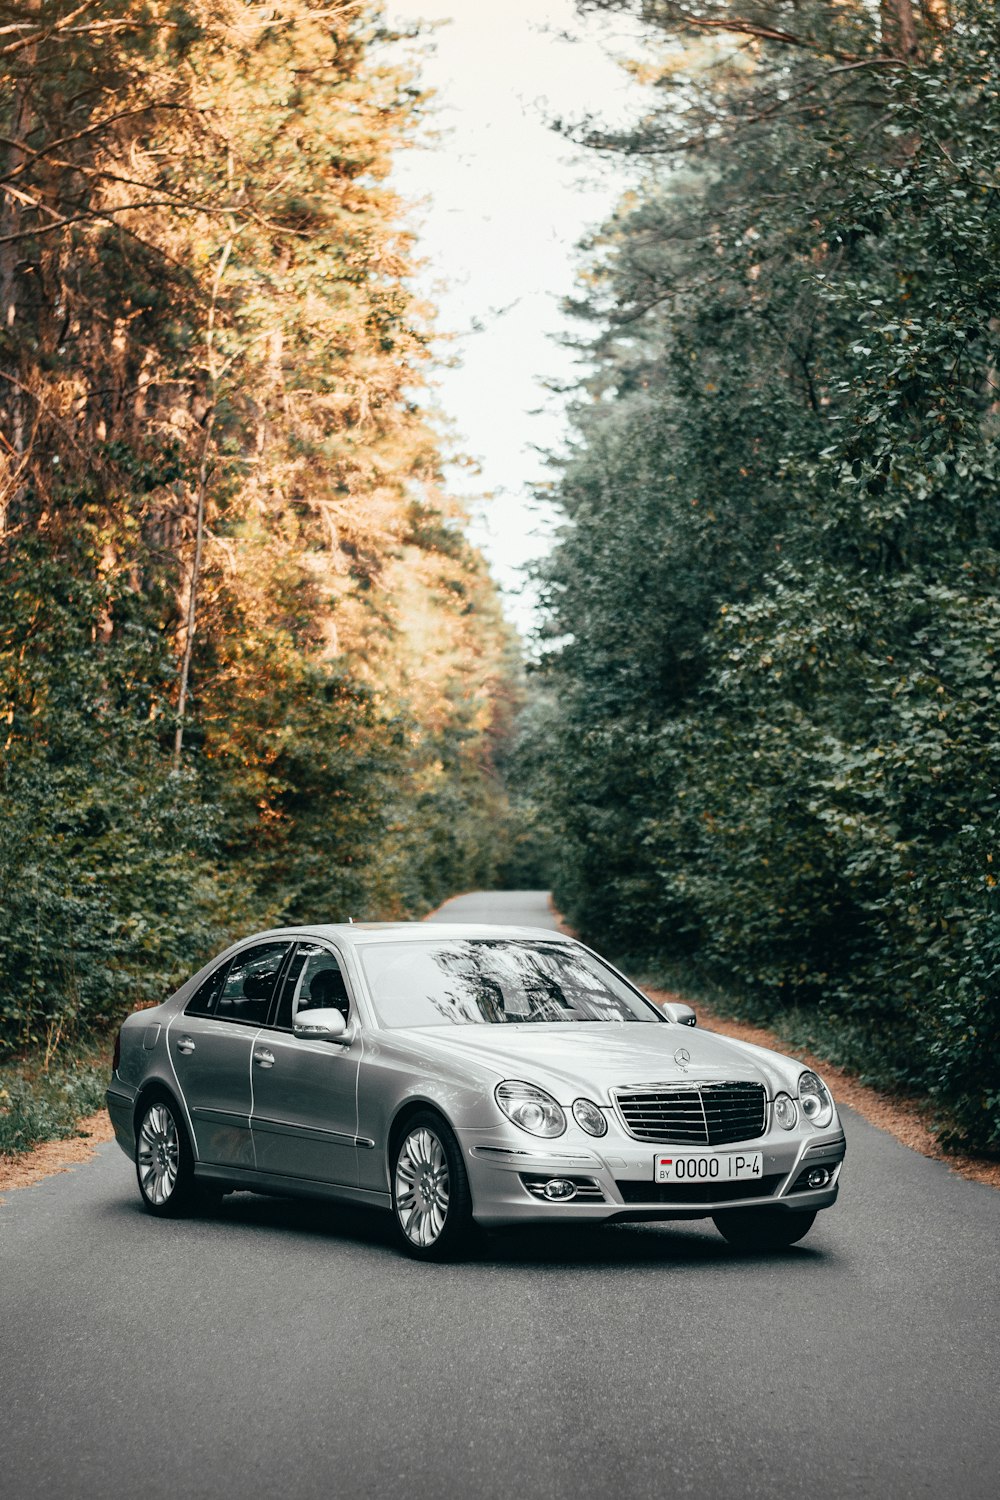 black mercedes benz sedan on road surrounded by trees during daytime